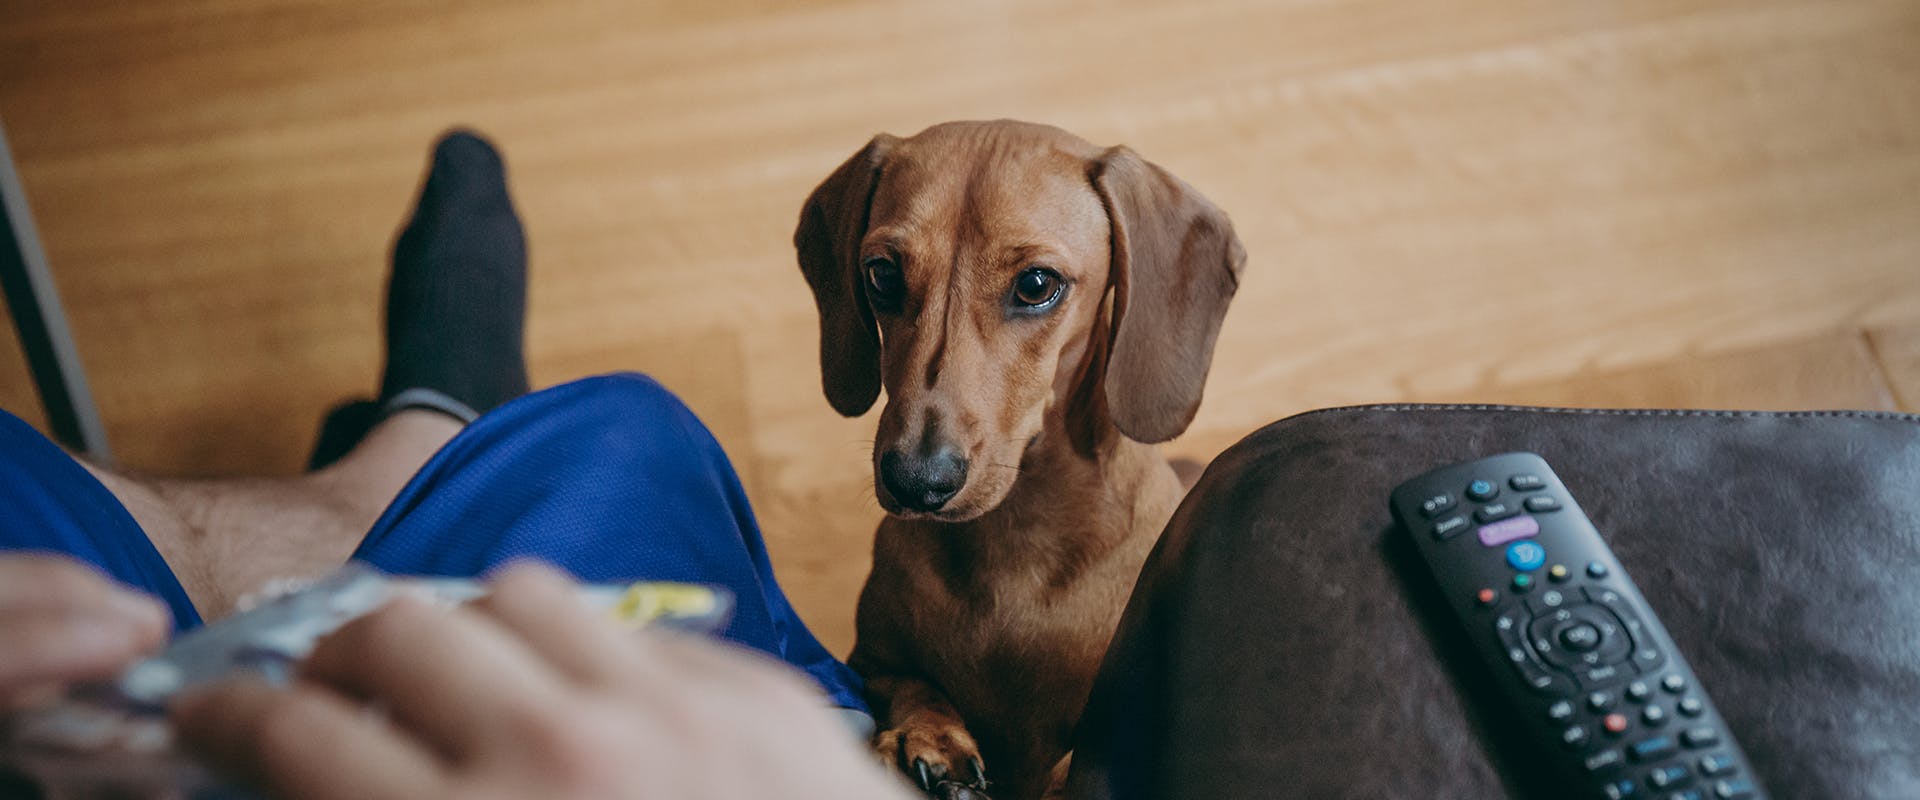 A Dachshund starting intently at its owner, who is sitting on a sofa